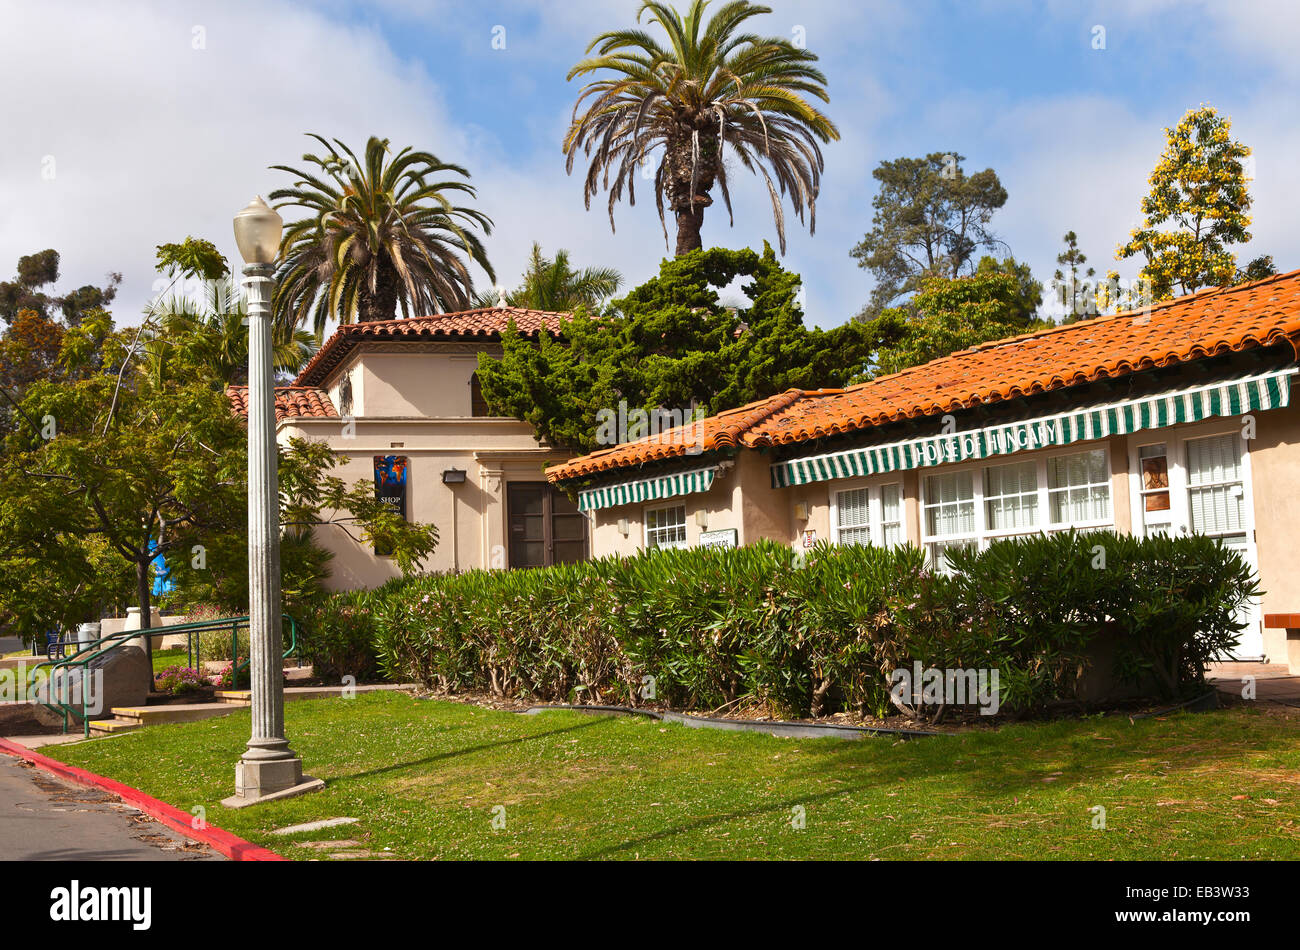 Balboa Park gardens and nations home exhibits San Diego Californ Stock Photo